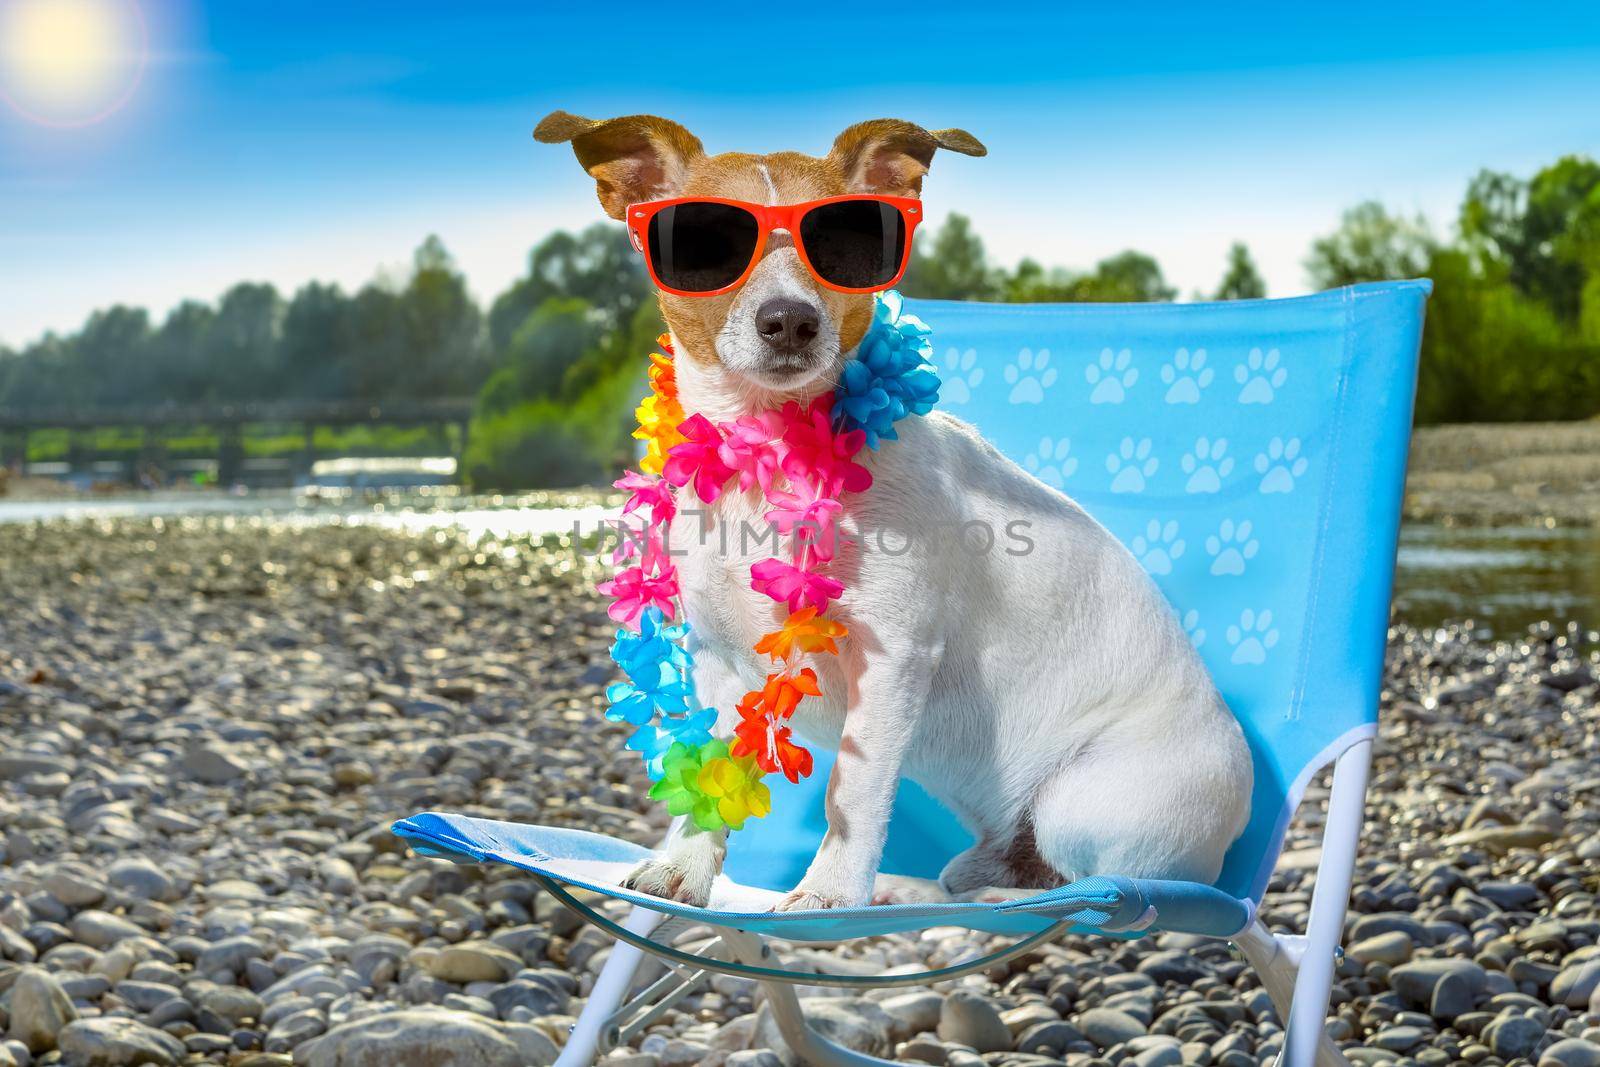 jack russell dog on a  beach chair or hammock at the beach relaxing  on summer vacation holidays, ocean or river  shore as background